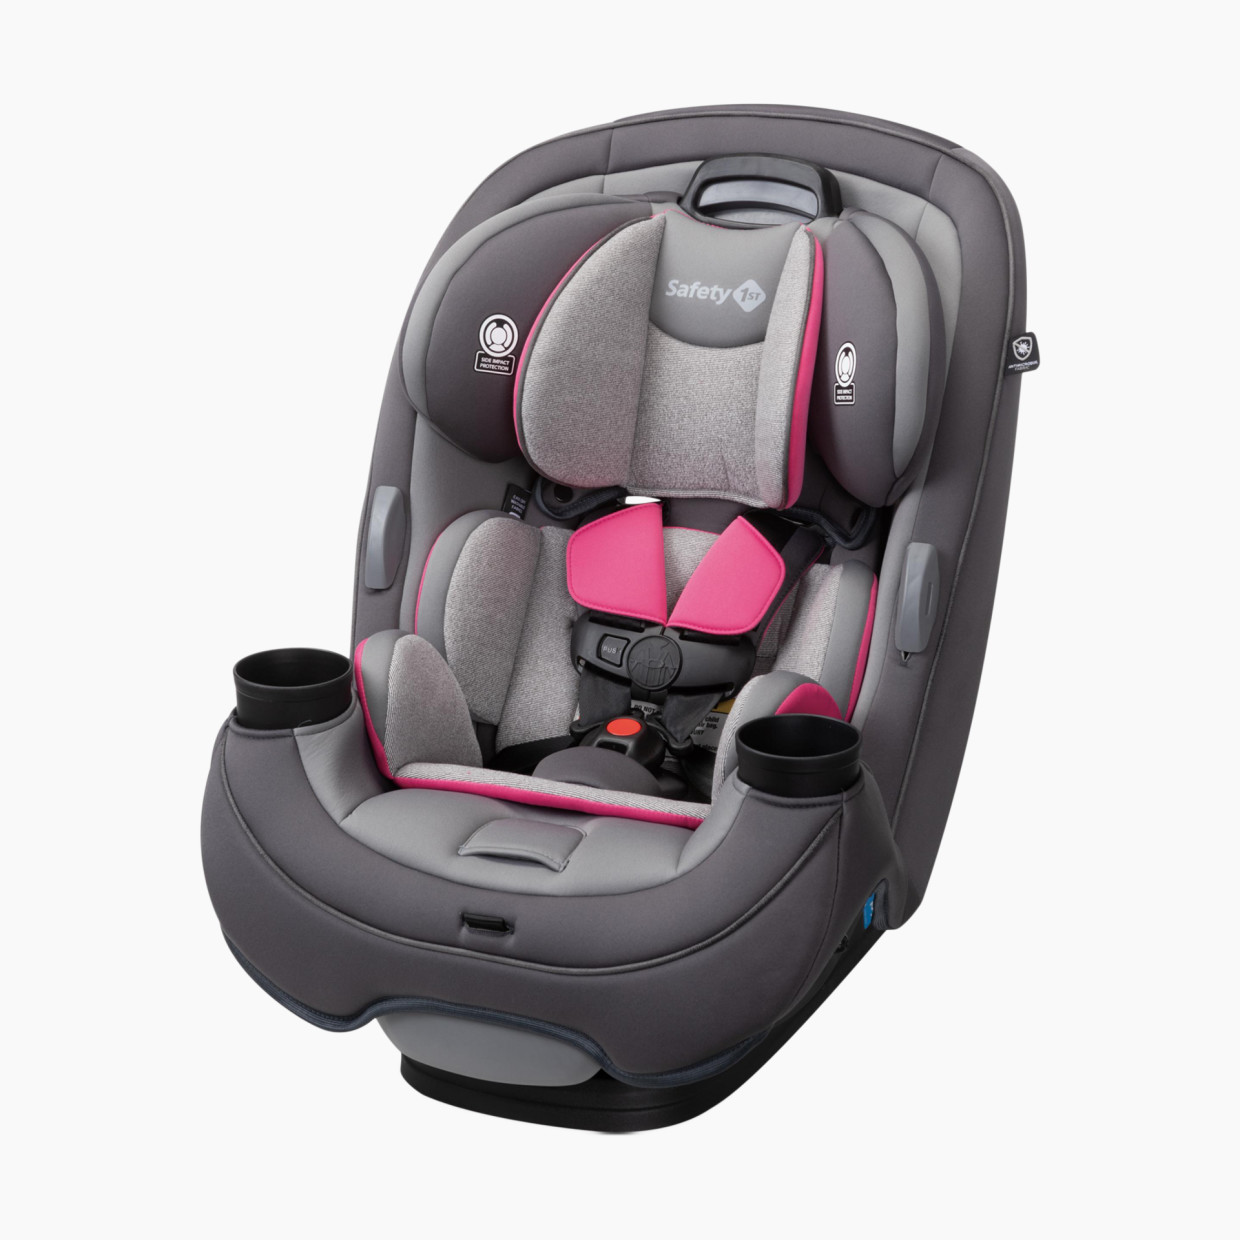 Safety 1st Grow and Go All-in-One Convertible Car Seat - Everest Pink.